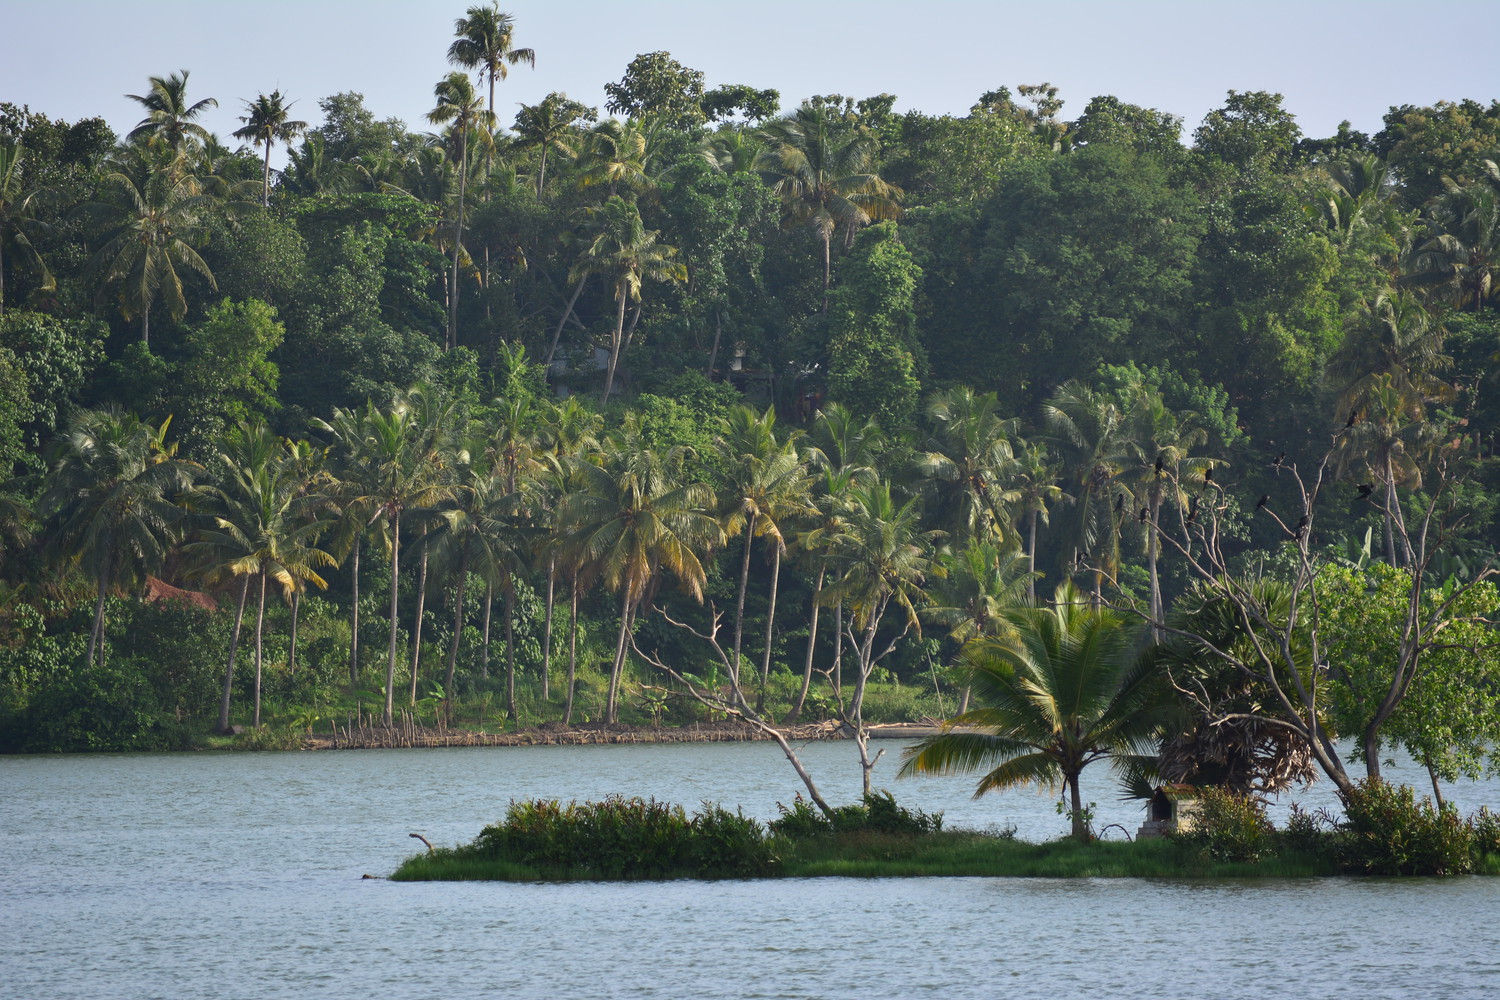 A lake with a tiny island of trees in the middle and many coconut palm trees in the background